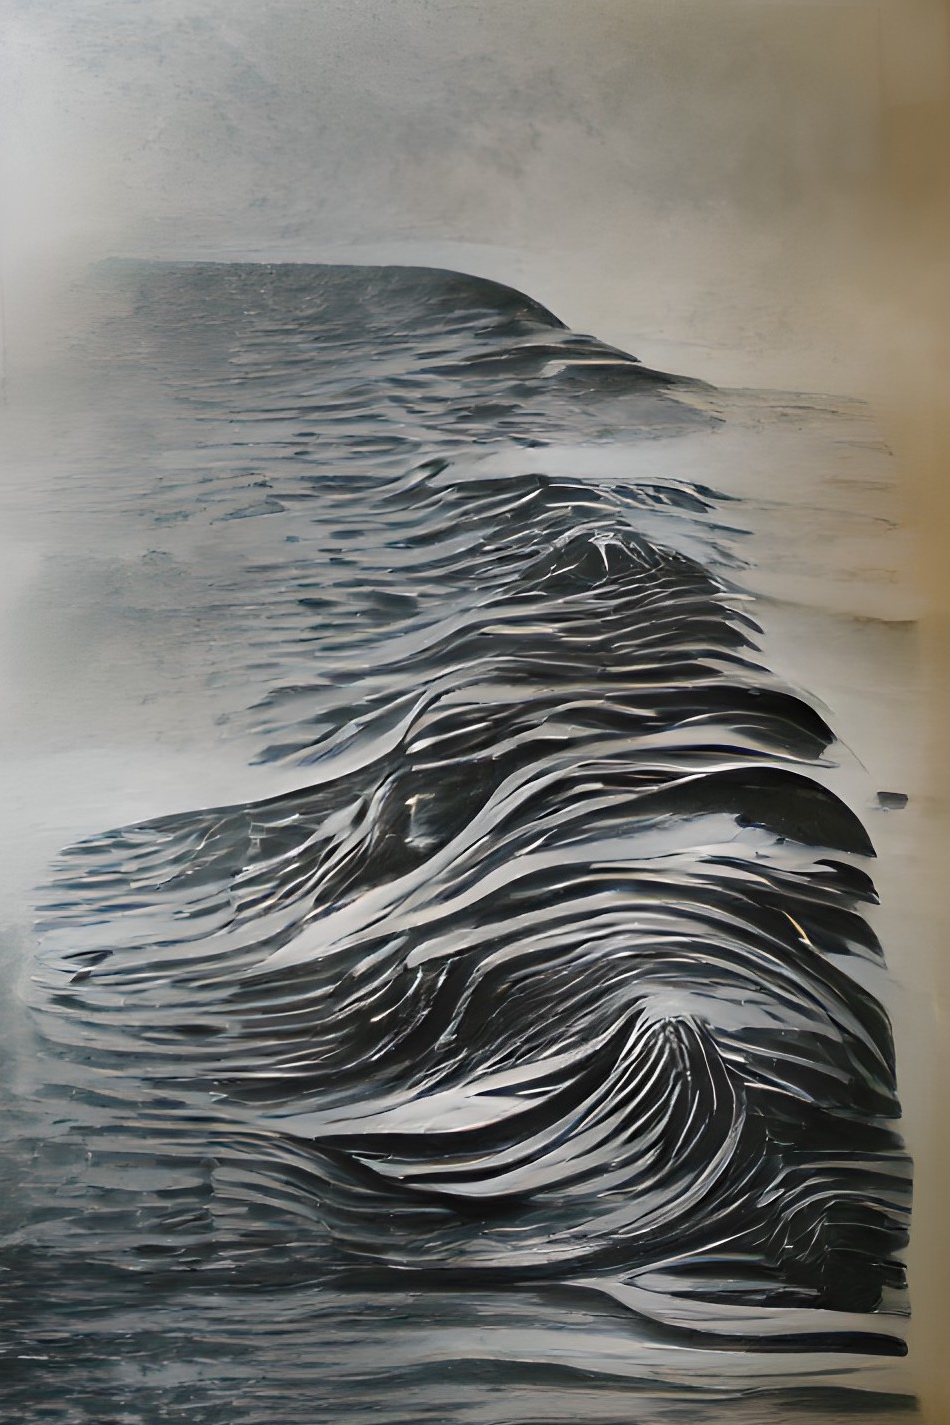 waves unleashed